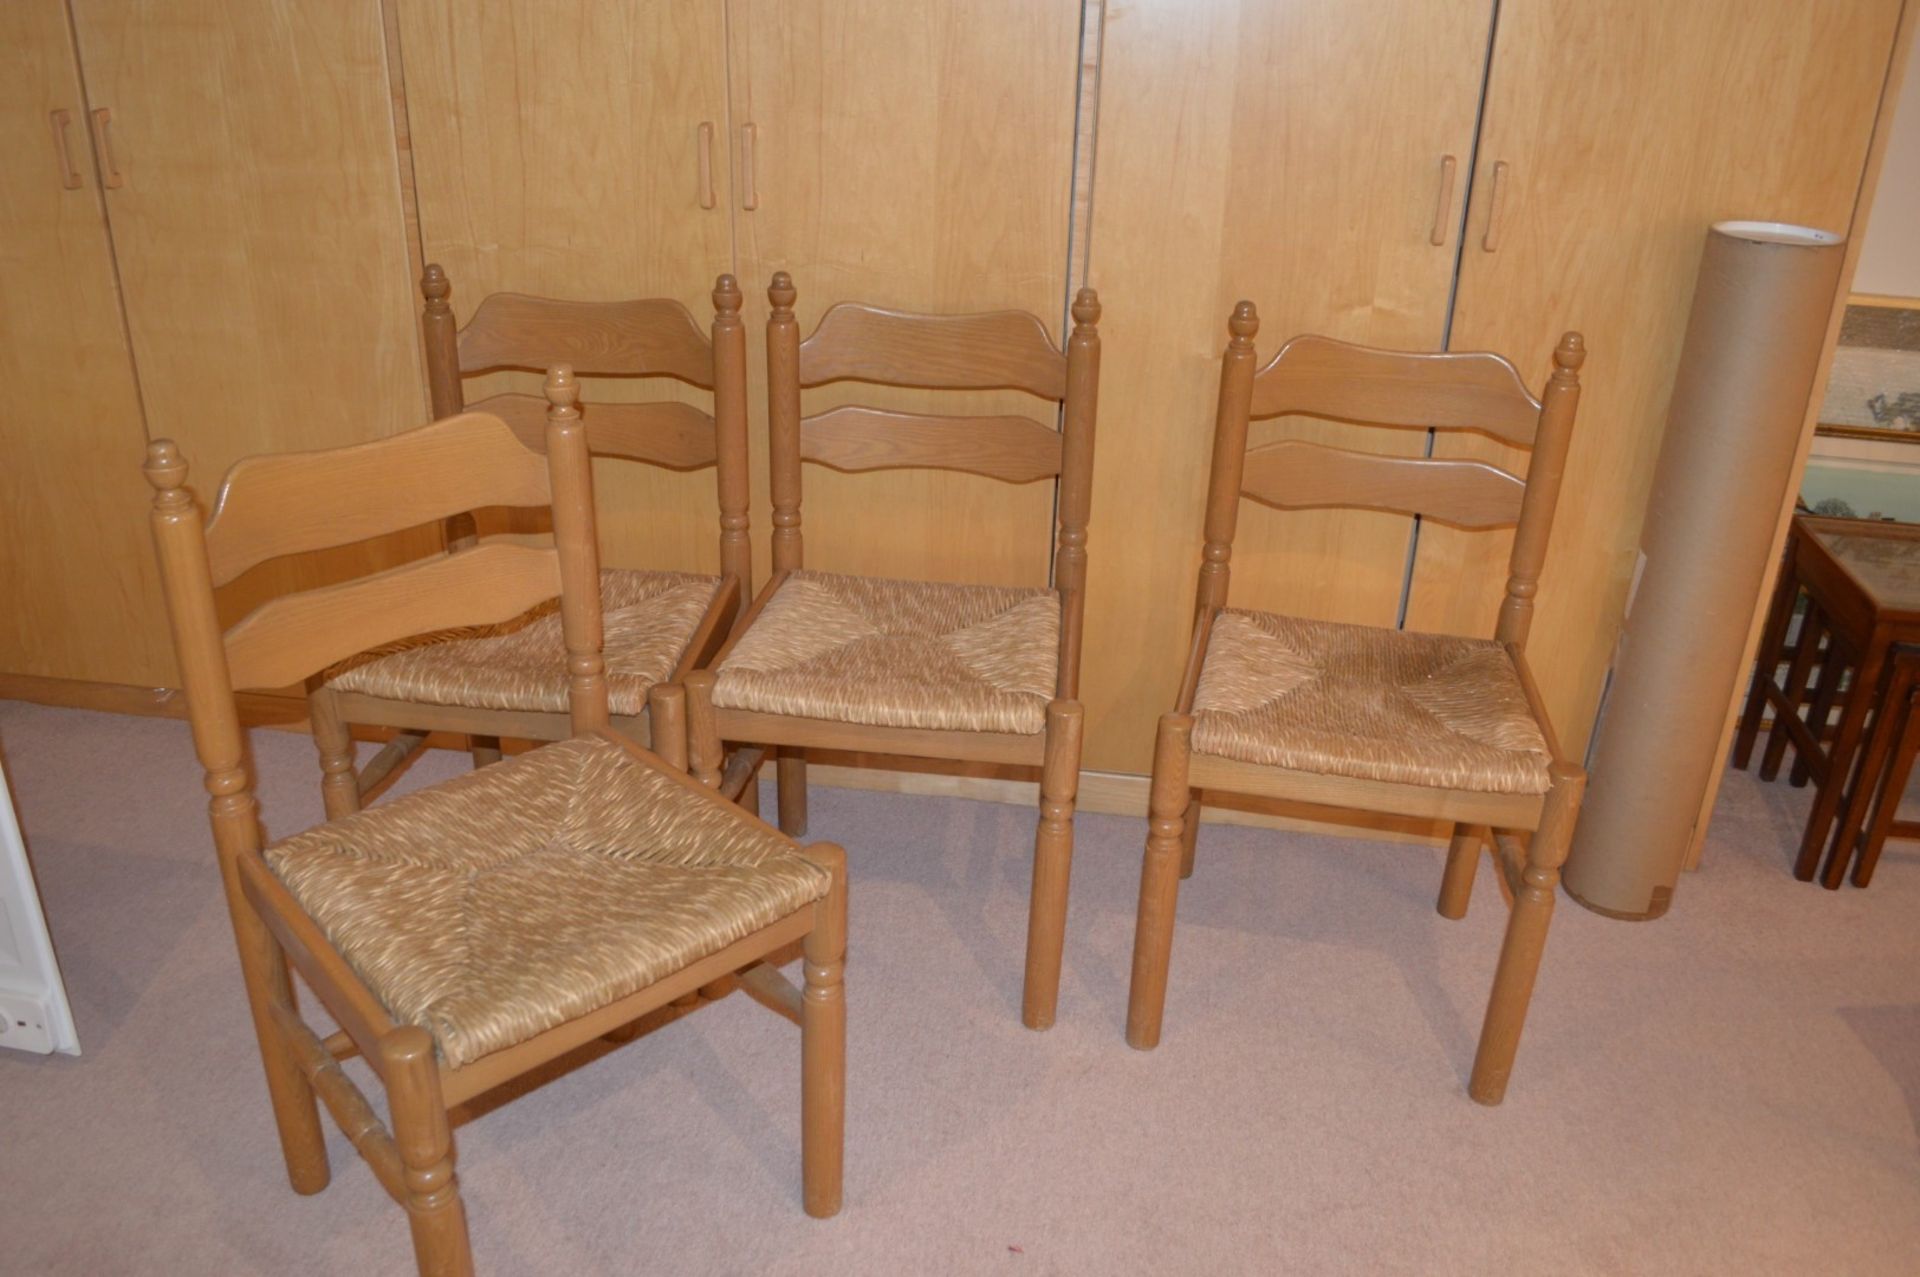 4 x Wooden Chairs With Thatched Seats - CL368 - Bowdon WA14 - NO VAT